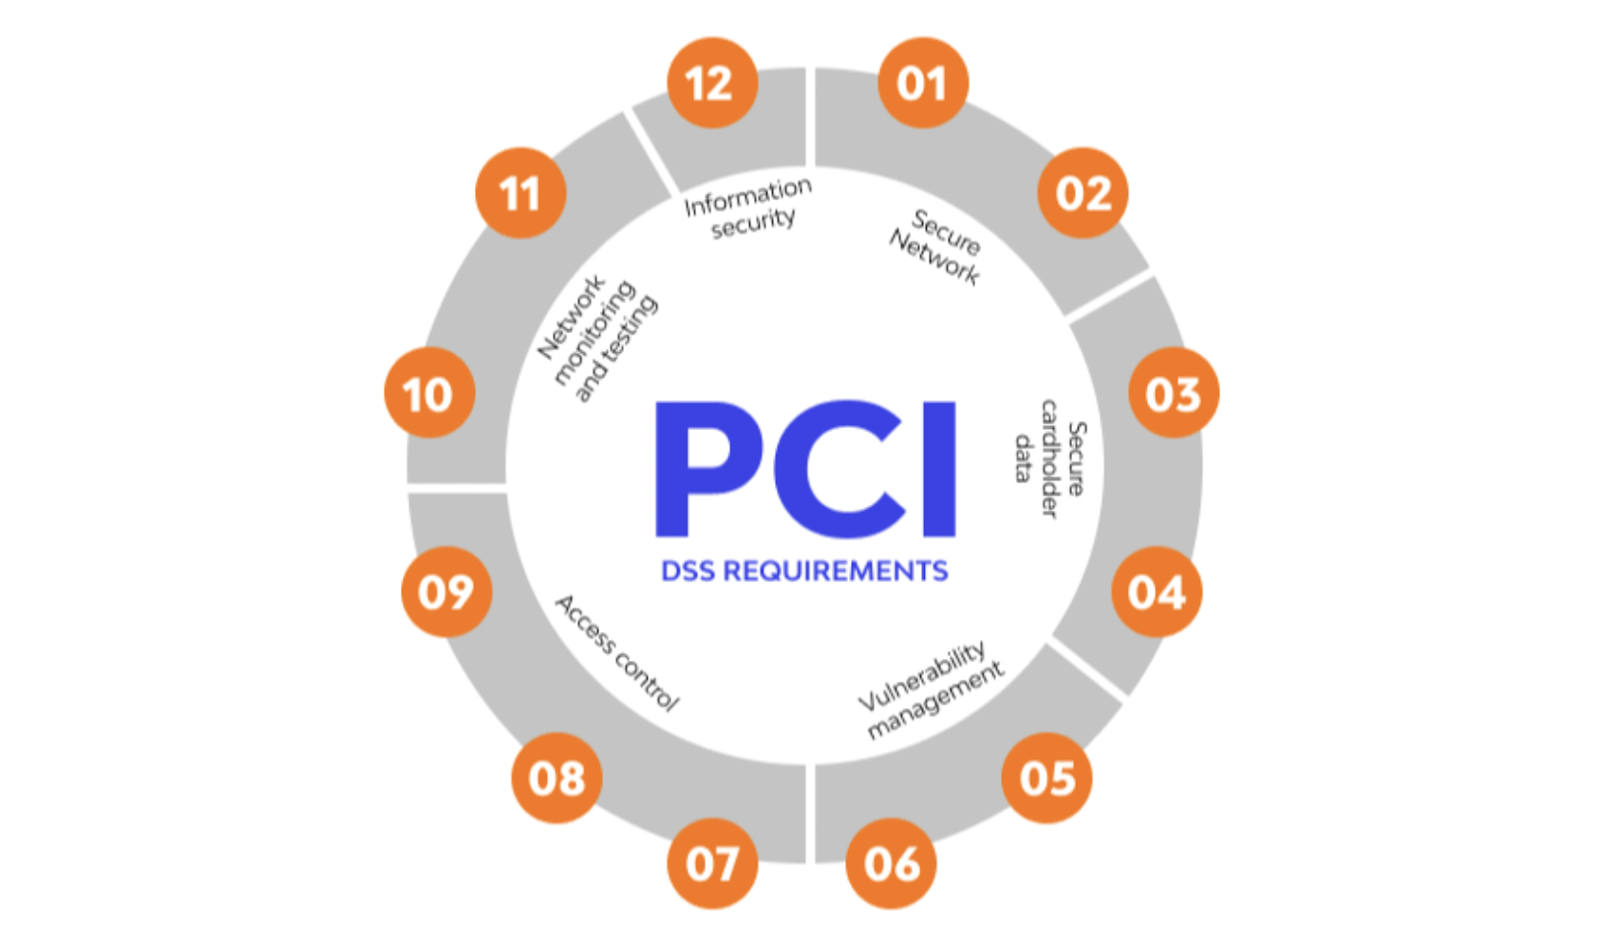 PCI DSS requirements